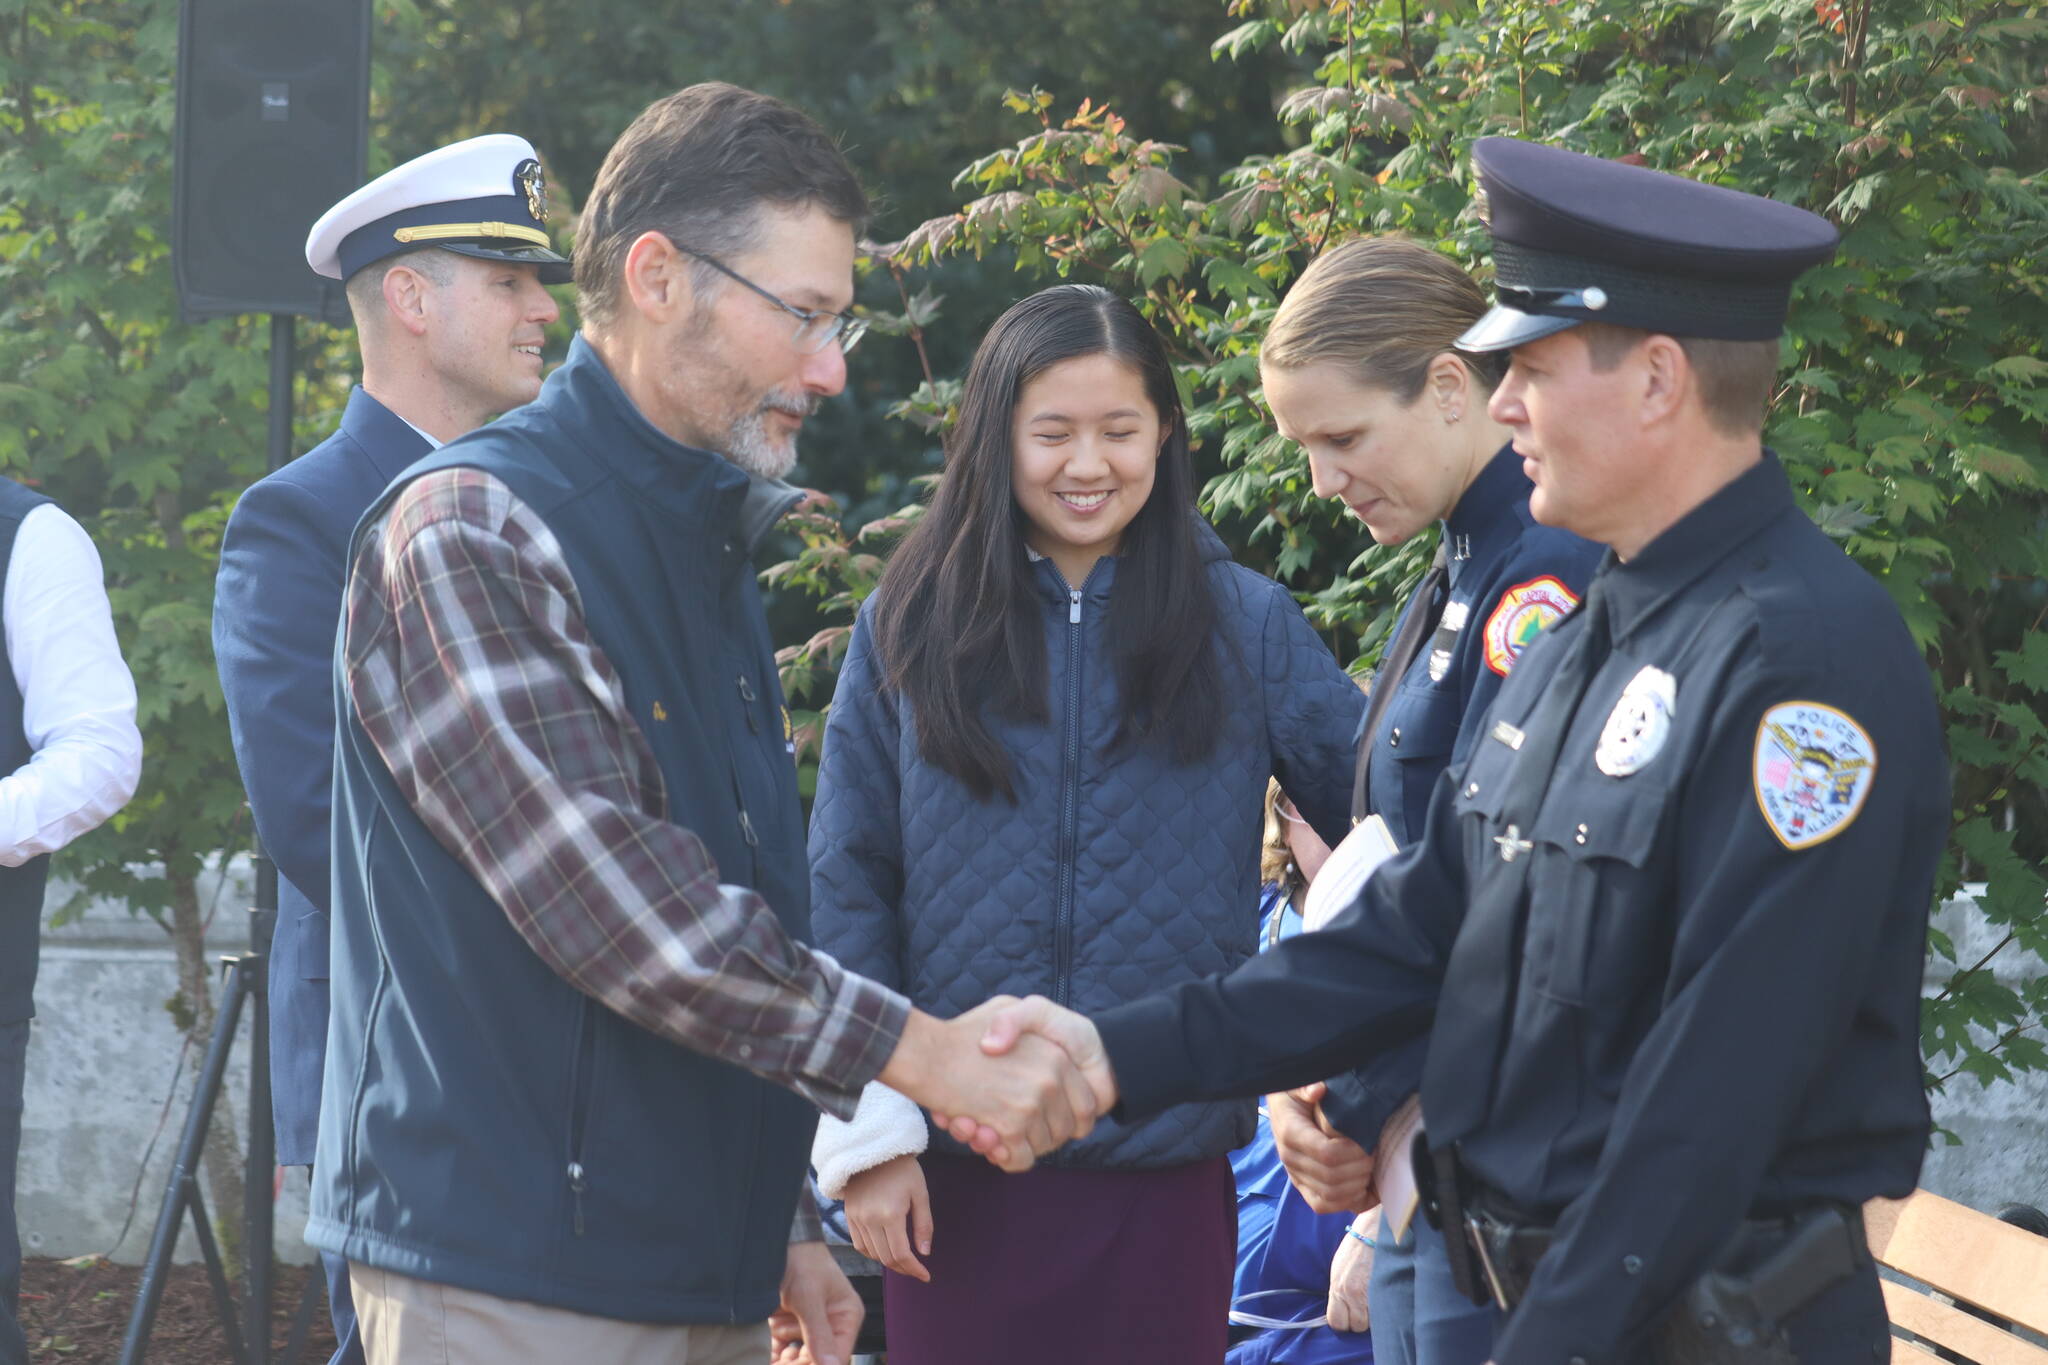 Juneau residents were given an opportunity to shake hands and personally thank various members of Juneau’s first responders. (Jonson Kuhn / Juneau Empire)